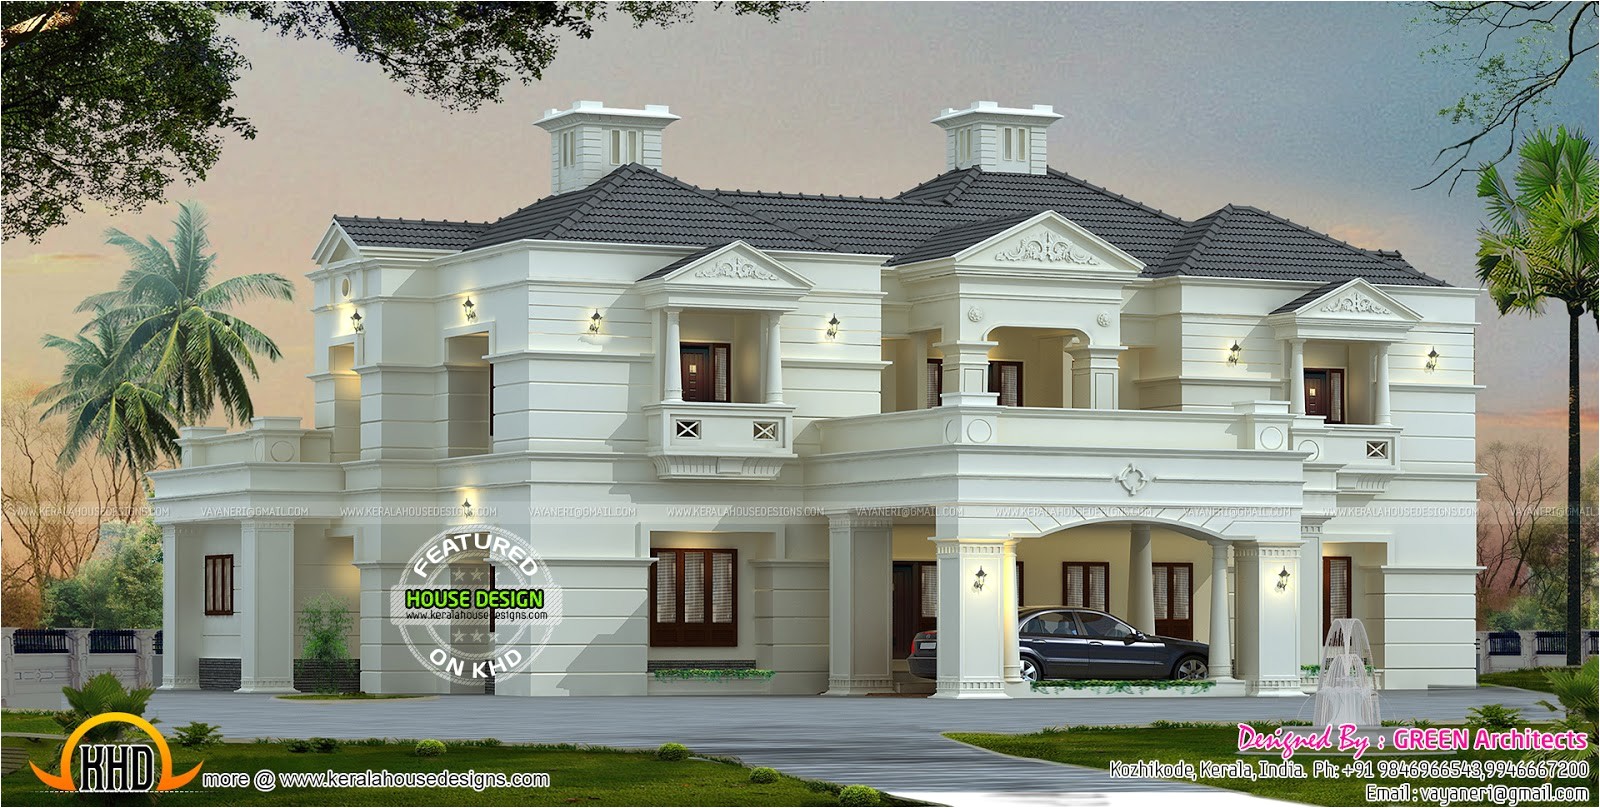 New Luxury Home Plans New Modern Luxury Home Kerala Home Design and Floor Plans